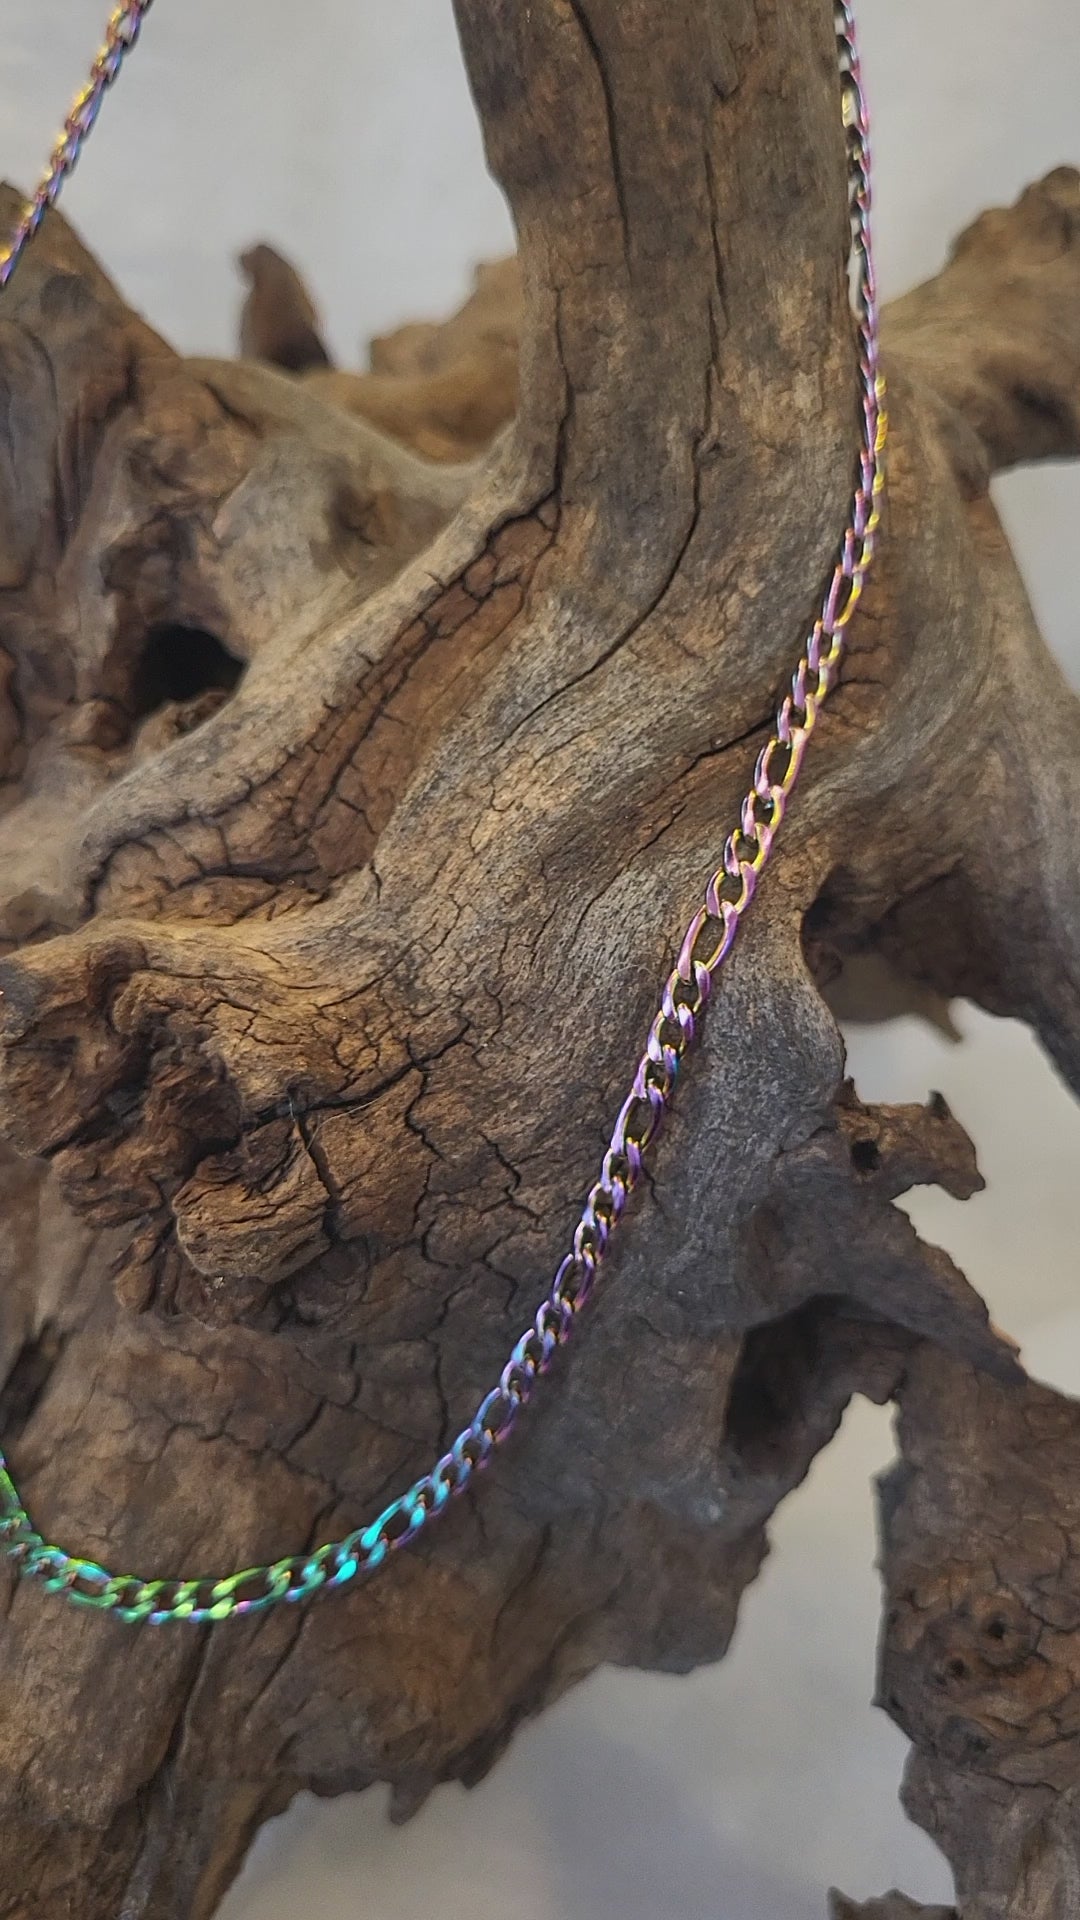 Short video of the figaro chain necklace hanging from a piece of driftwood. The video rotates side to side, then up an down, to show the shine and colour variation.